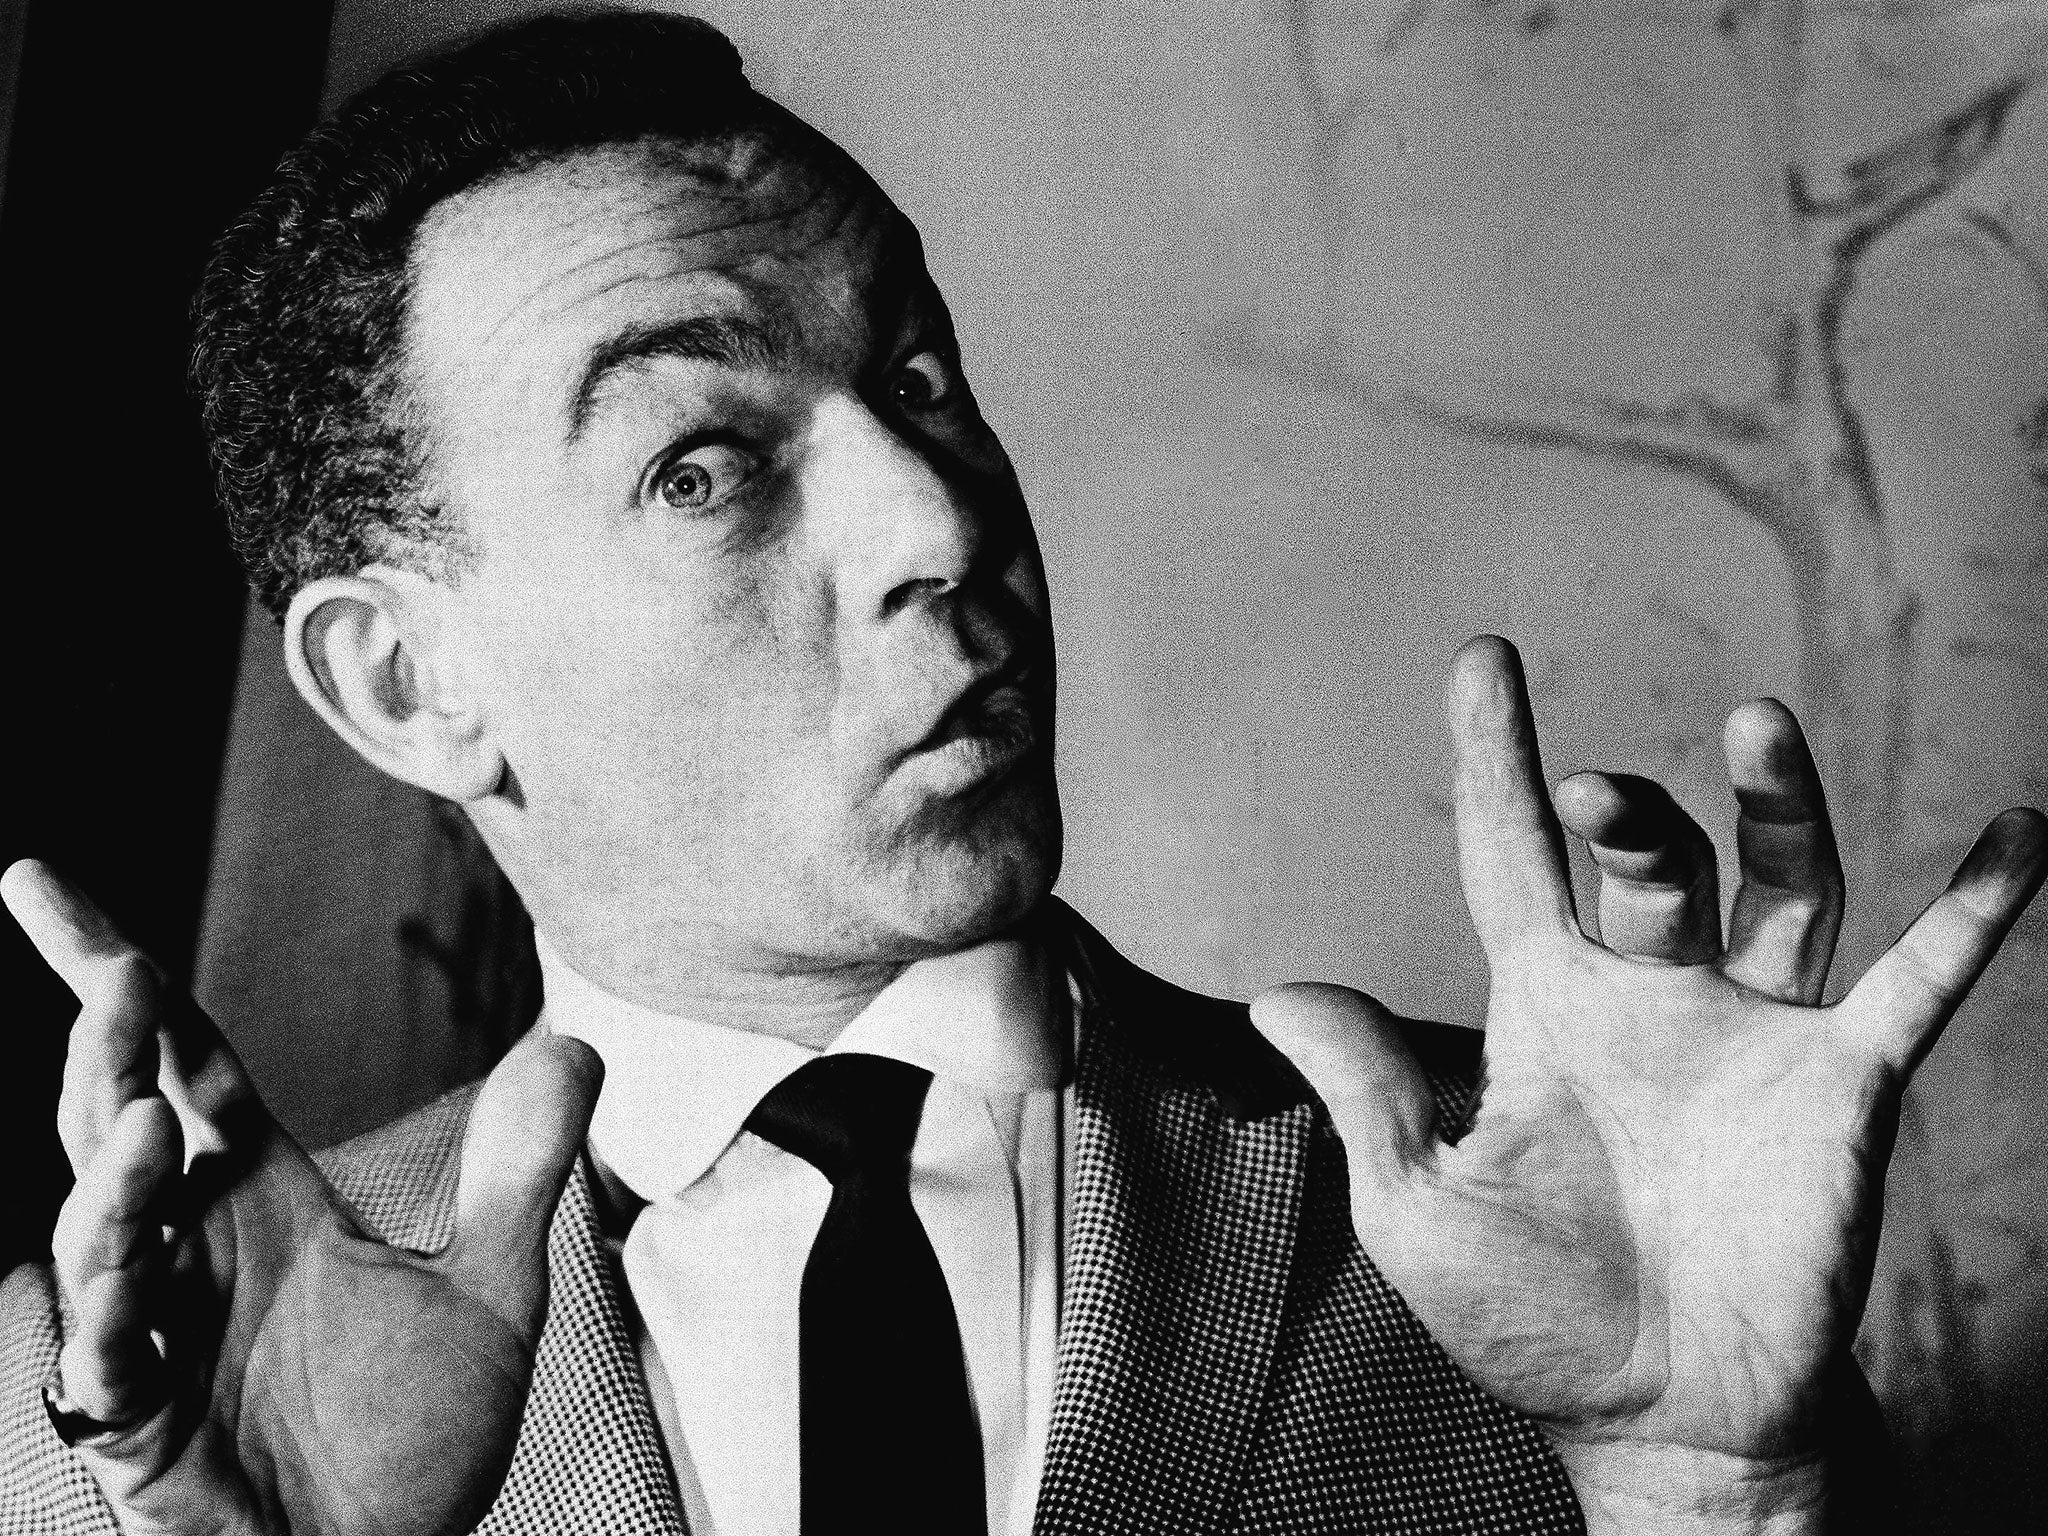 Carter in 1960: his NBC show was cancelled – ‘Producers fear you when you come on too strong,’ he said